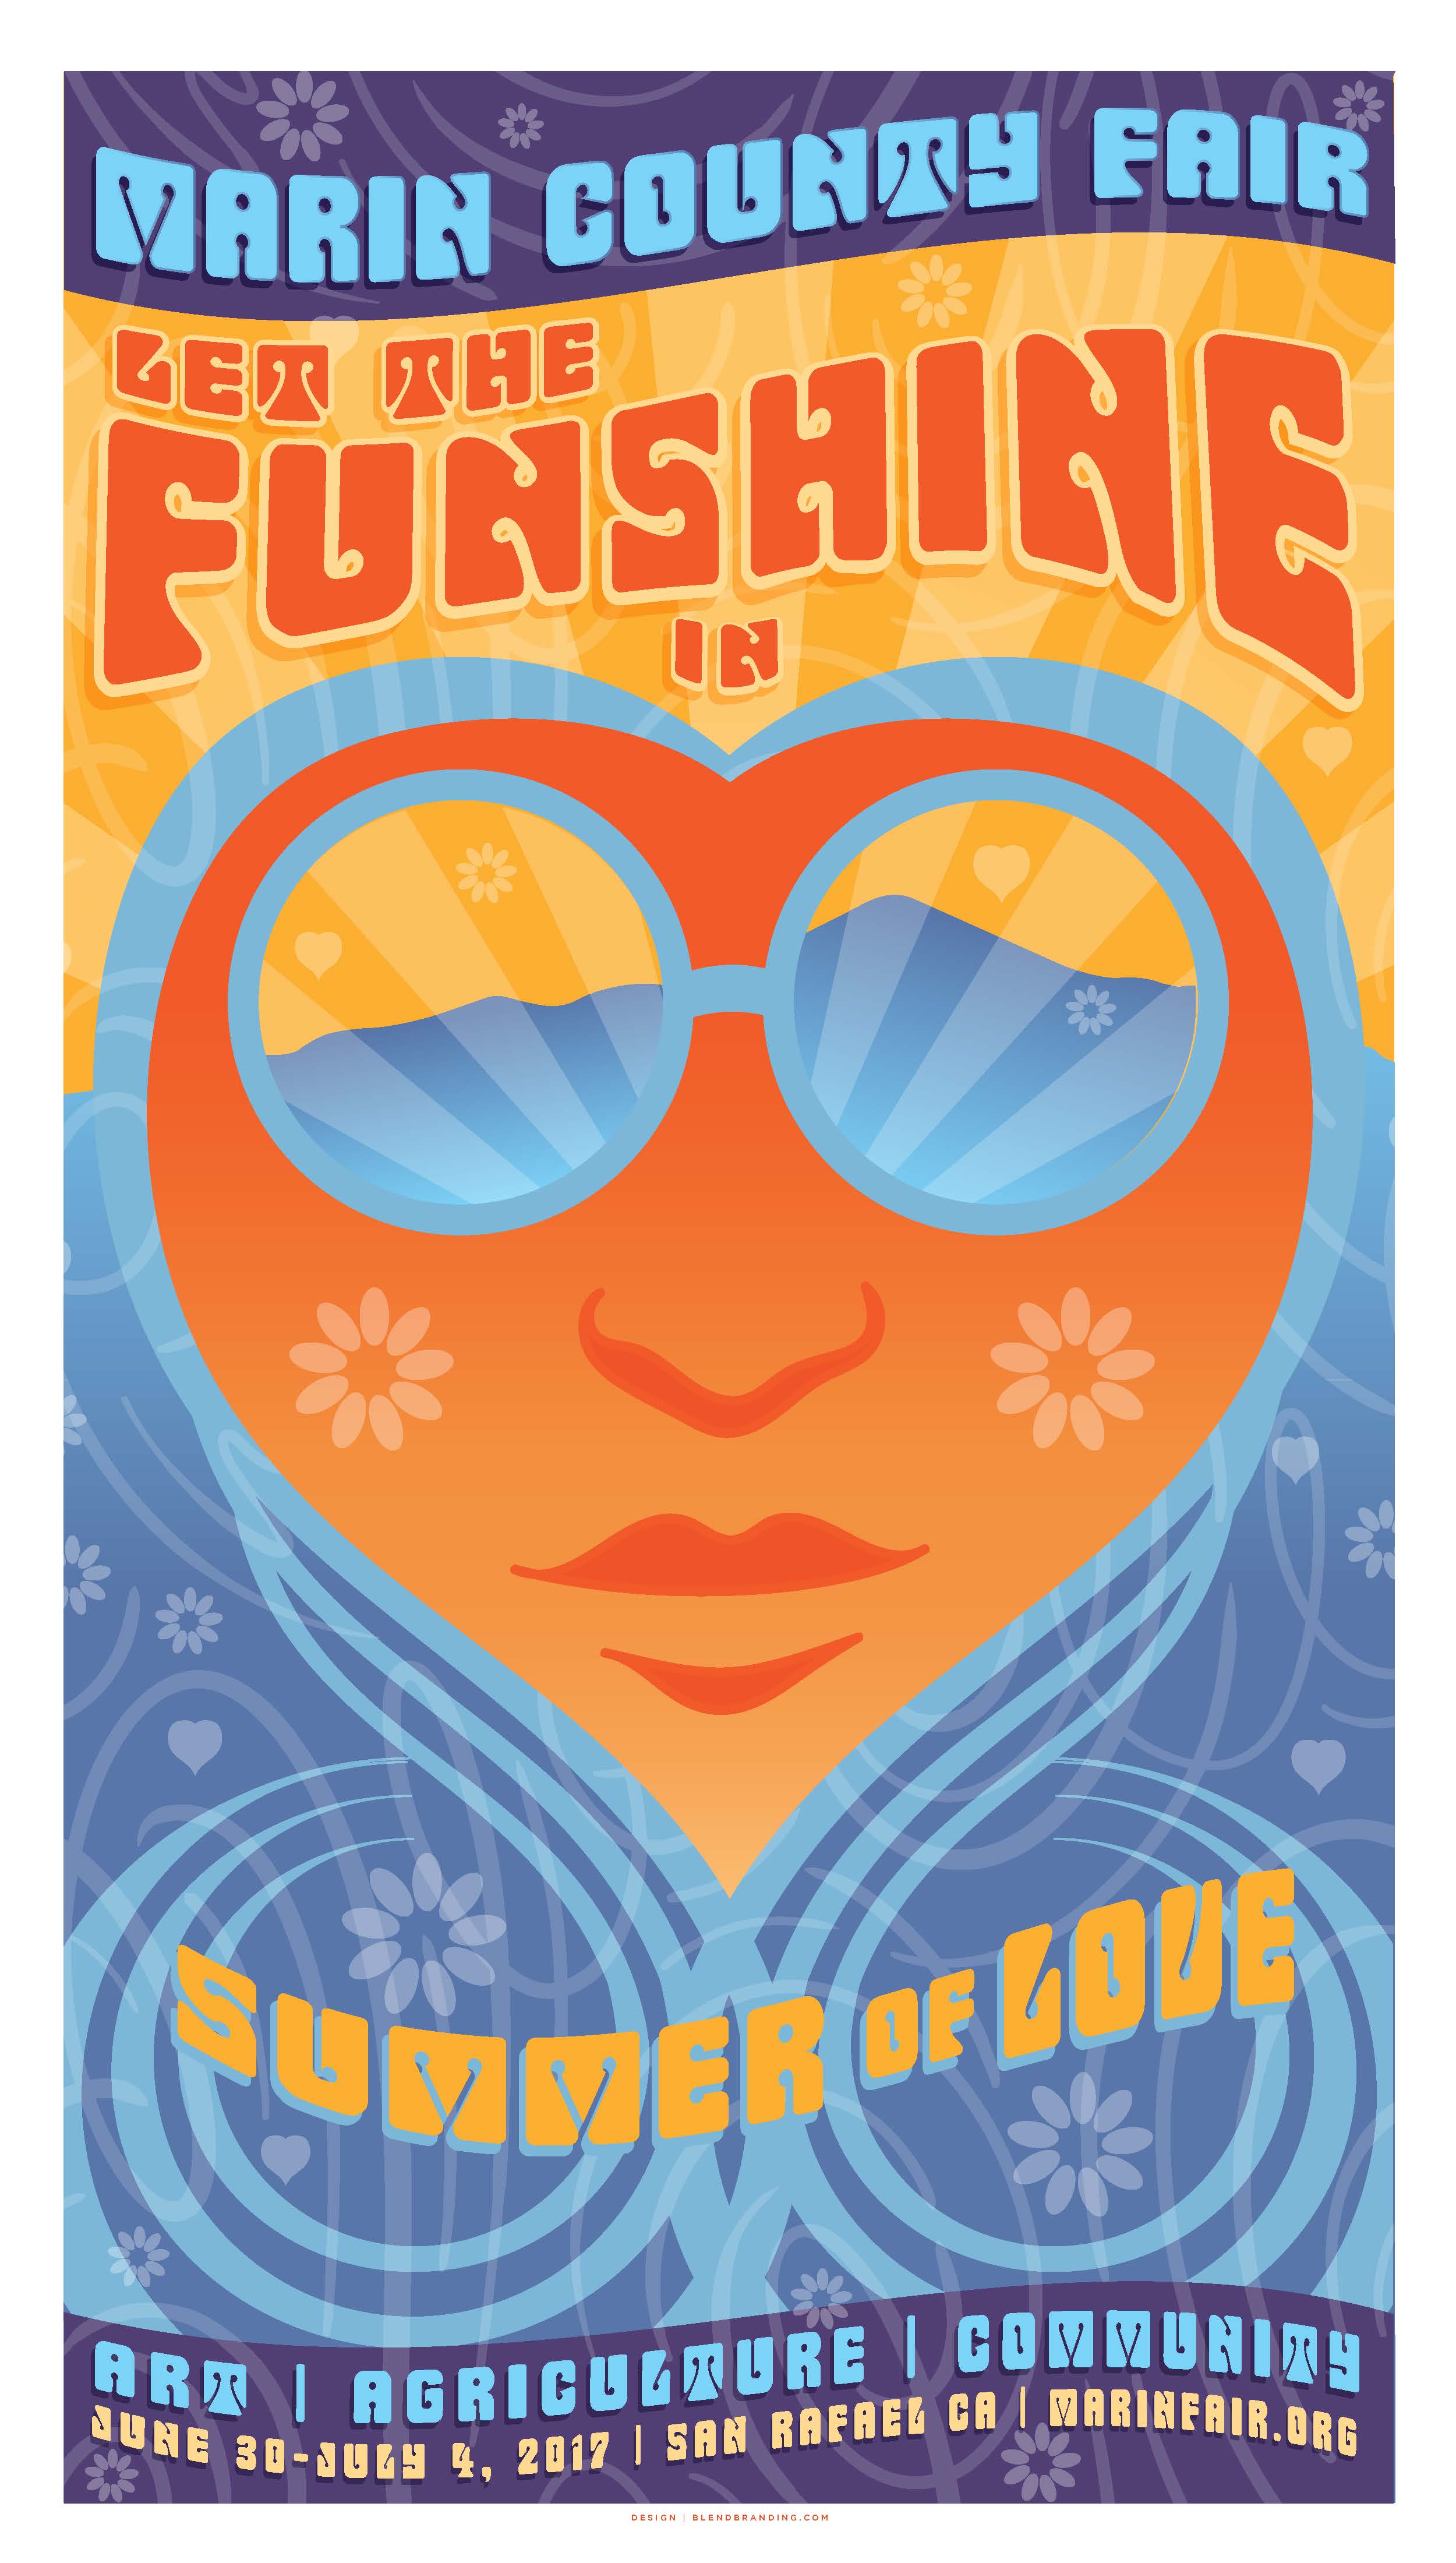 The Marin County Fair poster for 2017